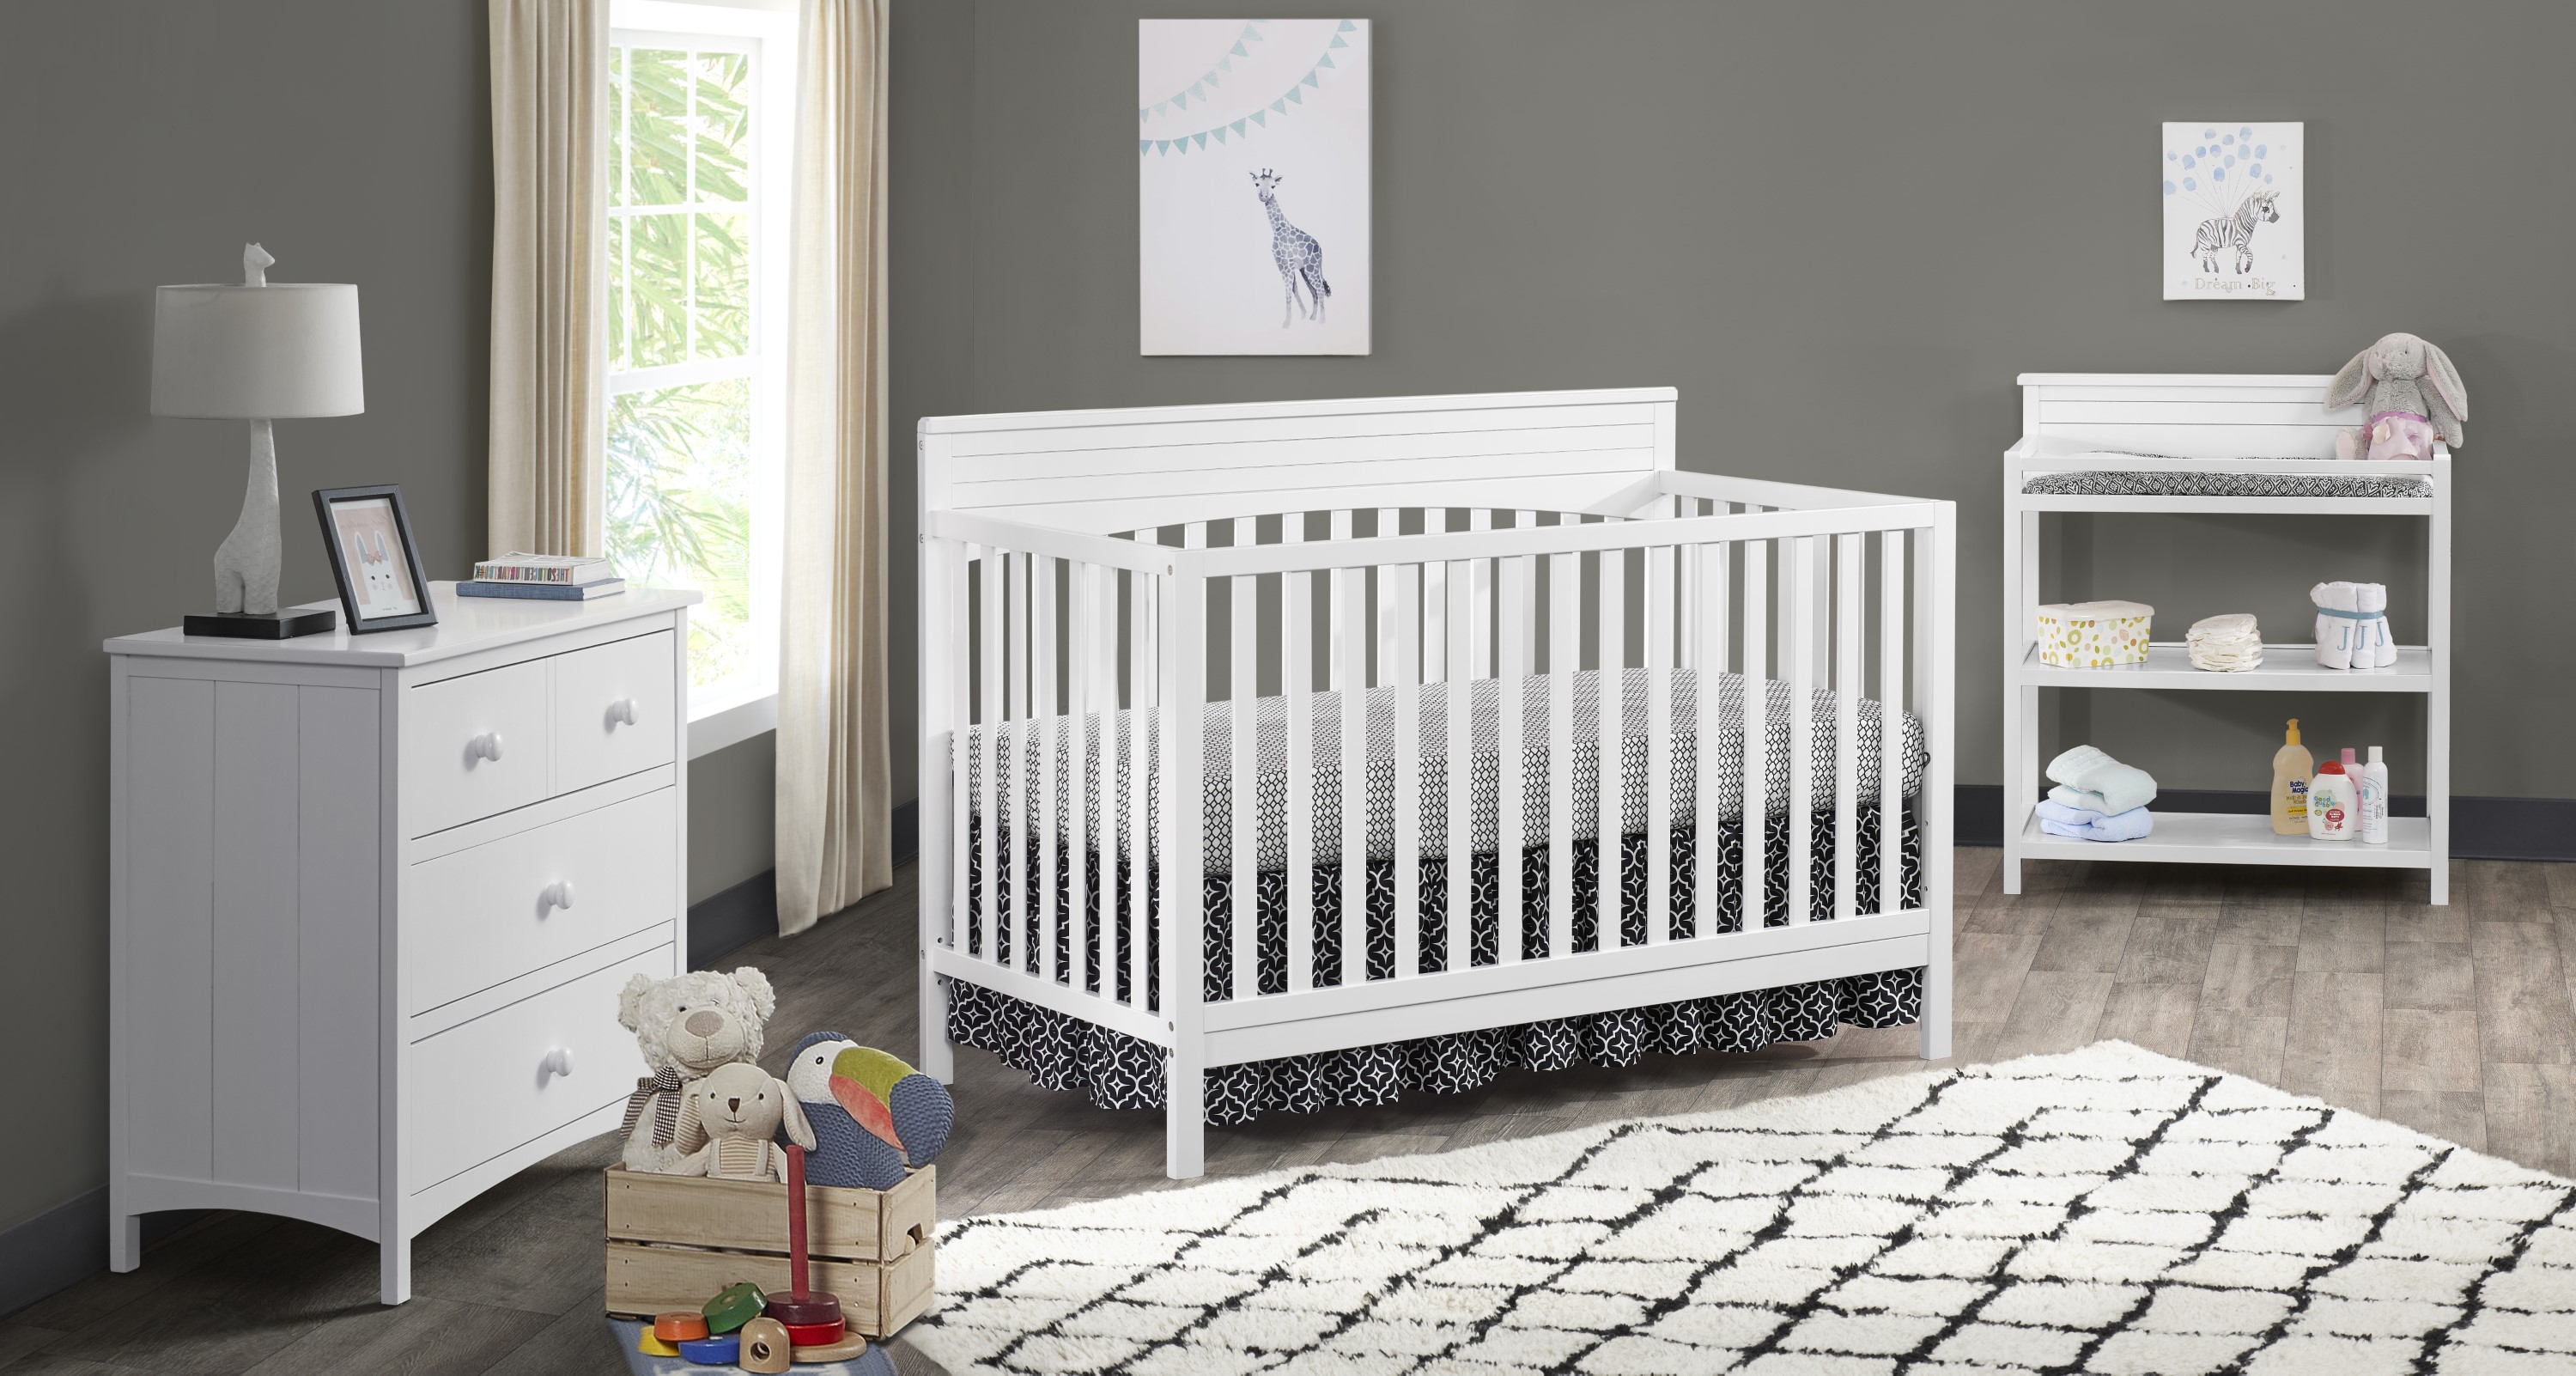 Oxford Baby Harper 4-in-1 Convertible Crib, Snow White, GREENGUARD Gold Certified, Wooden Crib - image 4 of 12